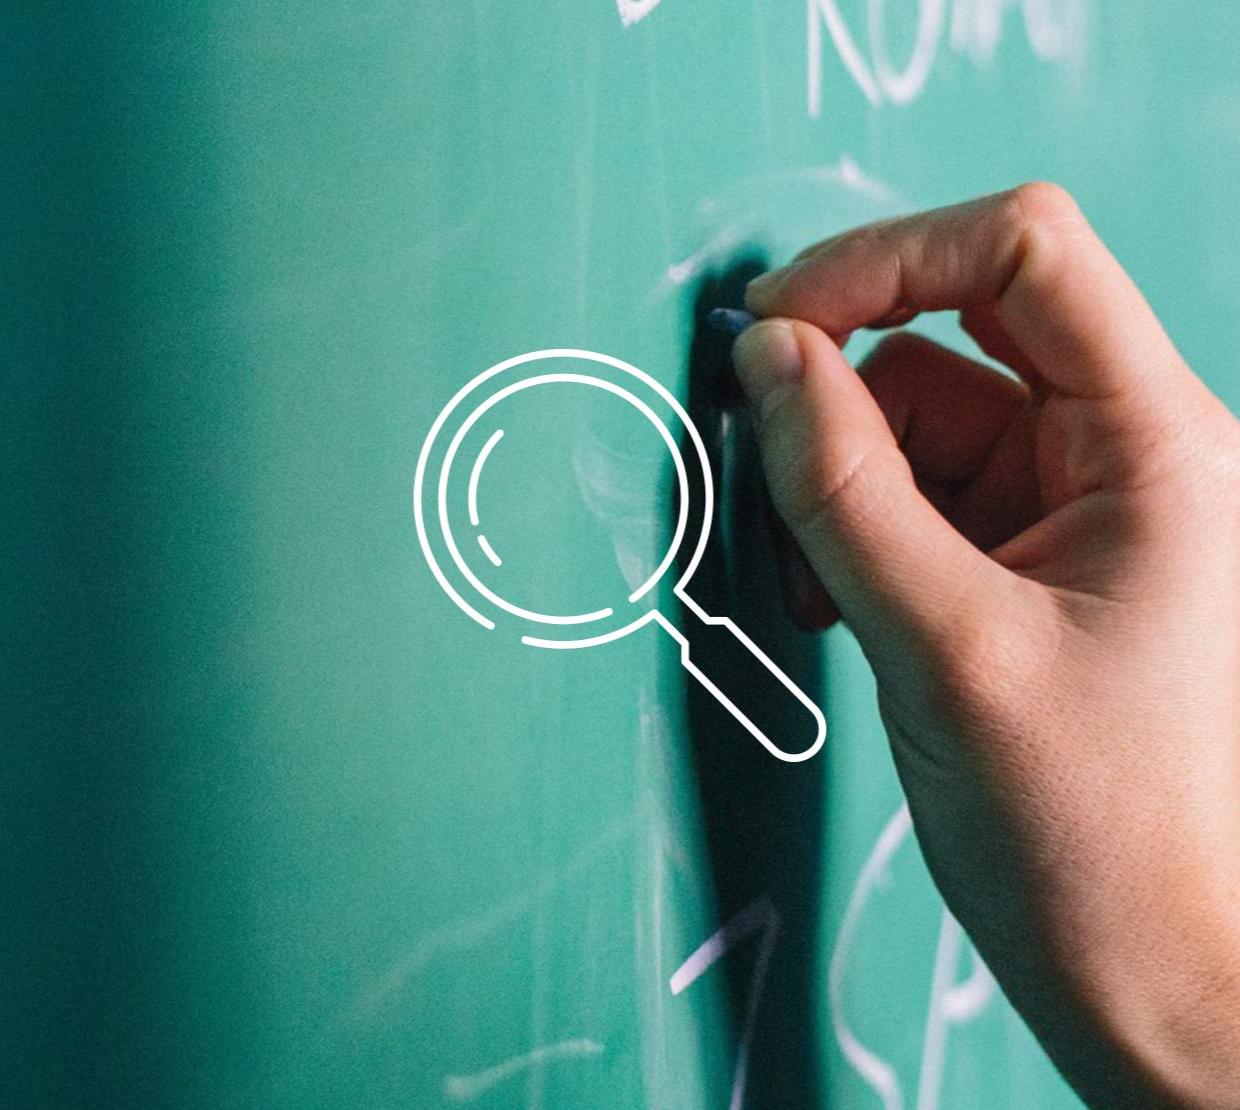 Magnifying glass icon above image of handing writing on chalkboard